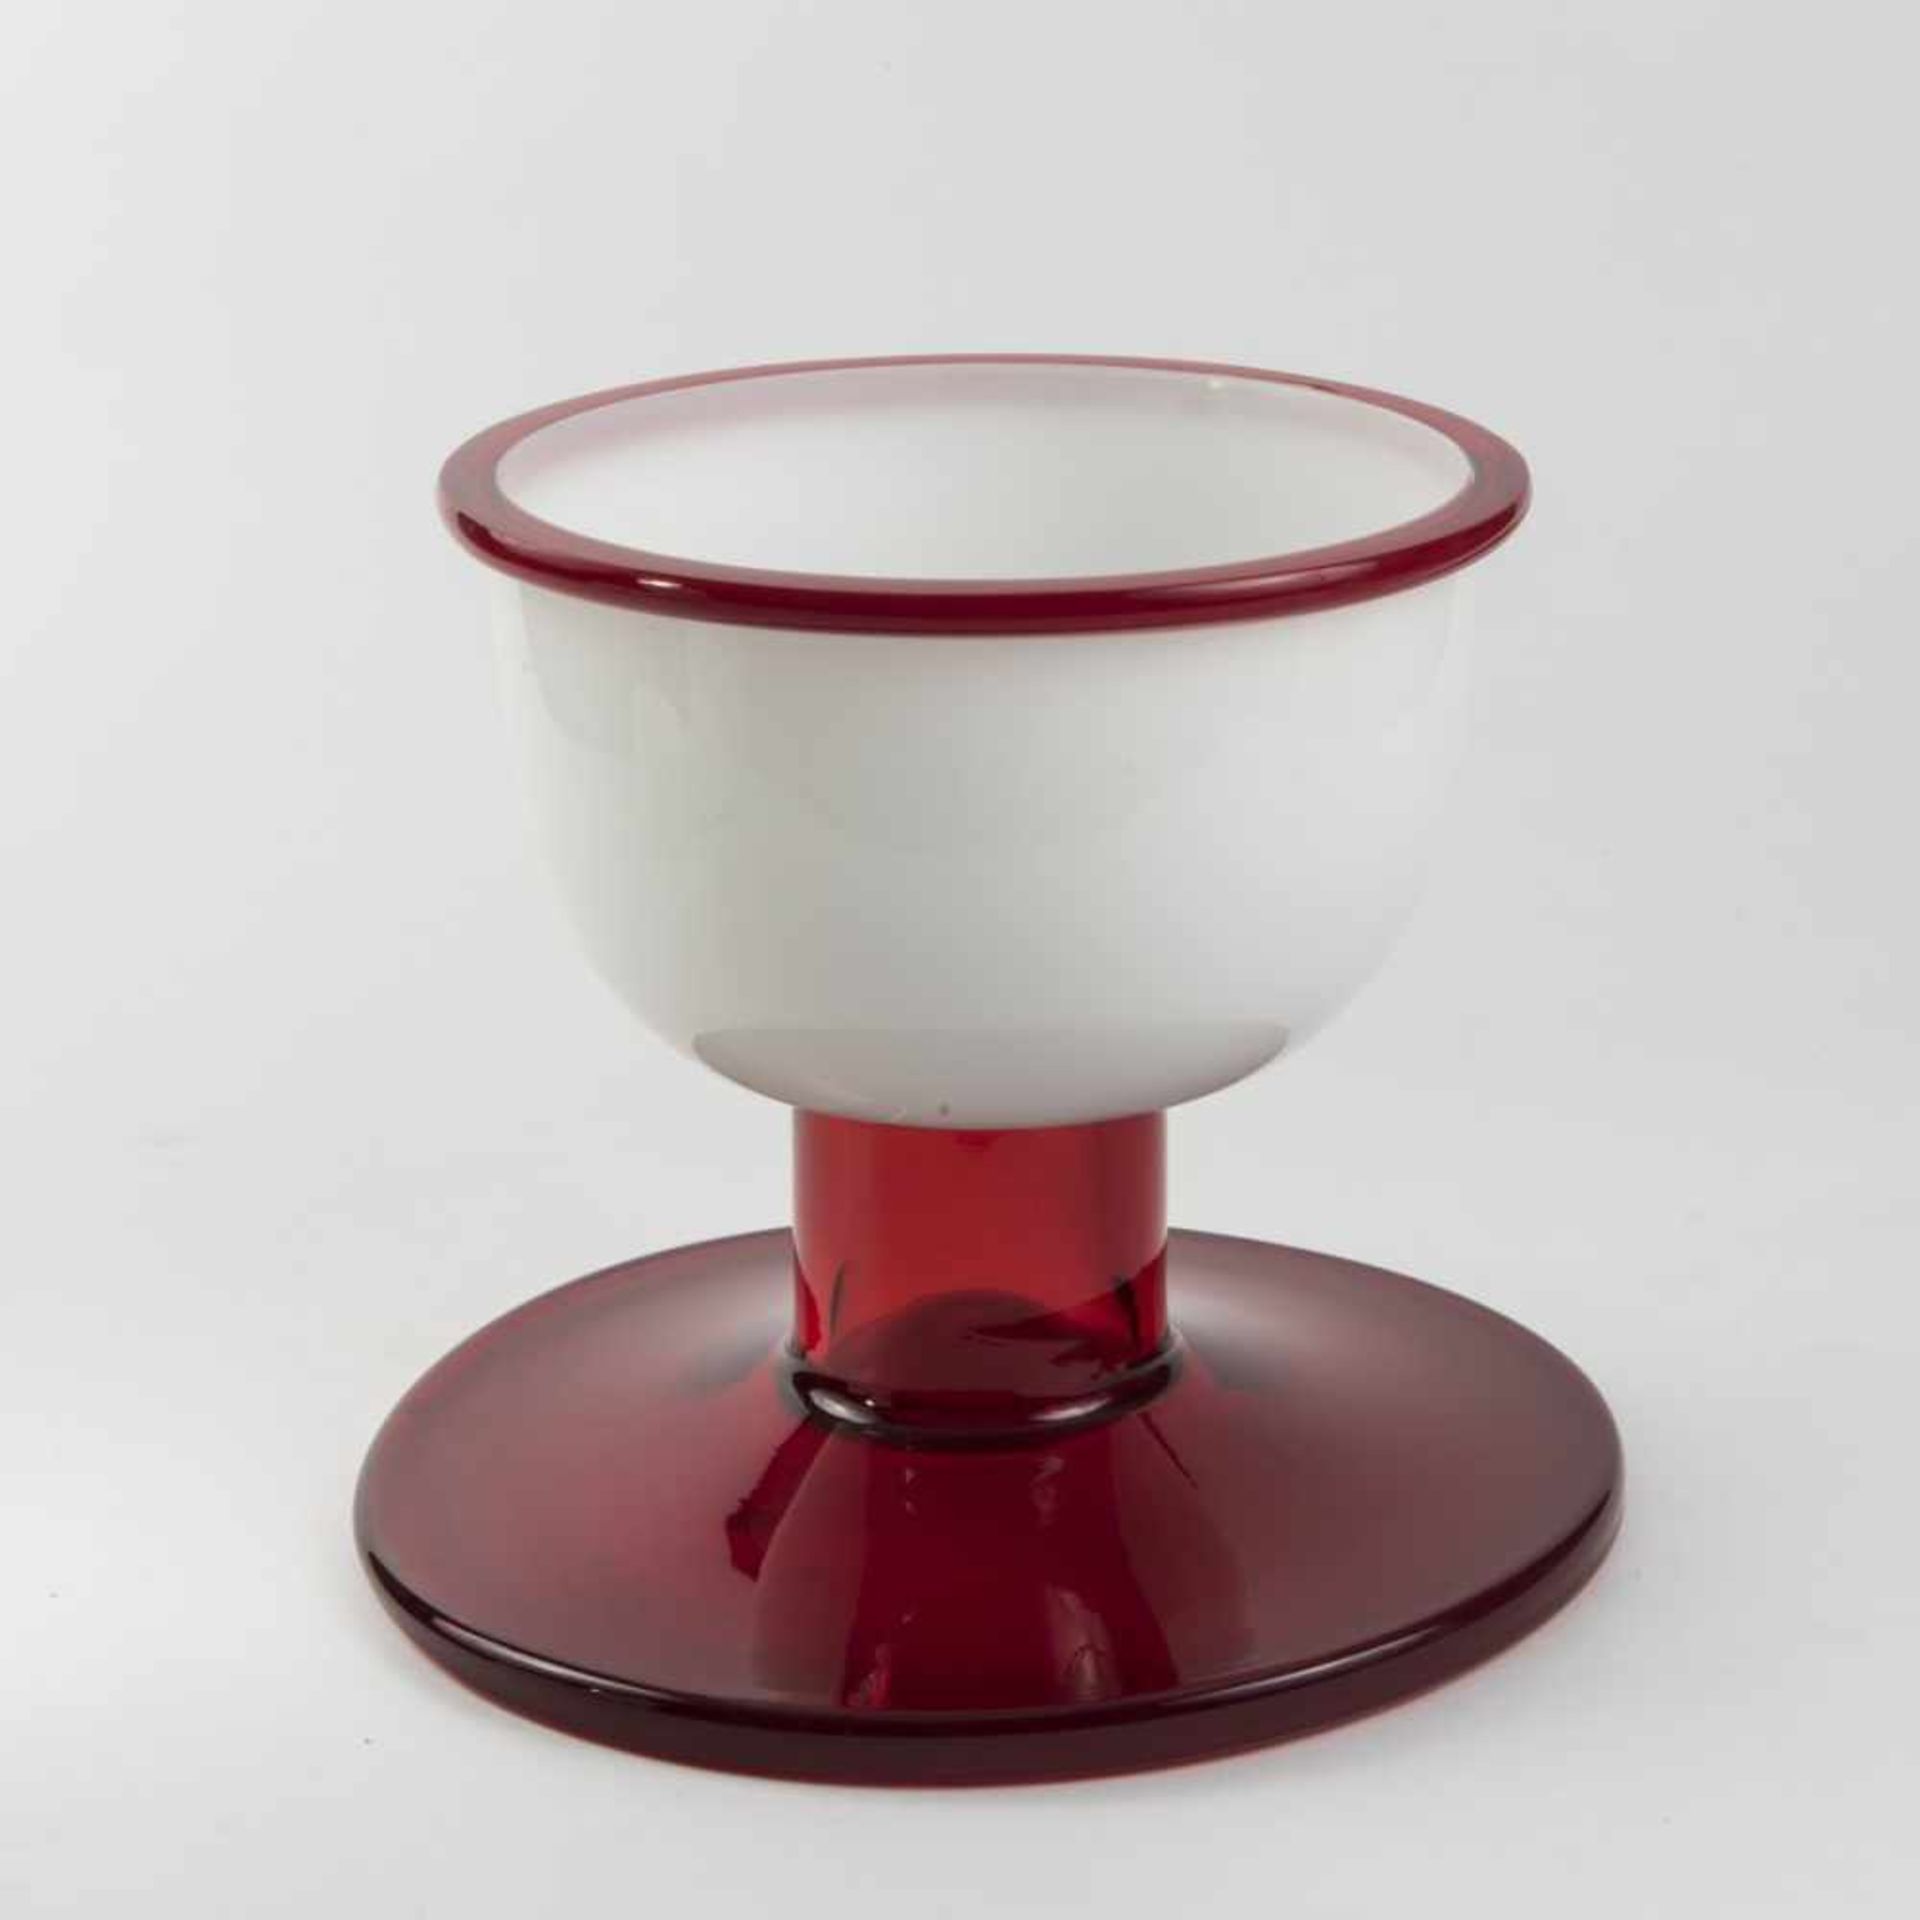 Ettore Sottsass, Footed 'Schiavona' bowl, 1974Footed 'Schiavona' bowl, 1974H. 25 cm. Made by